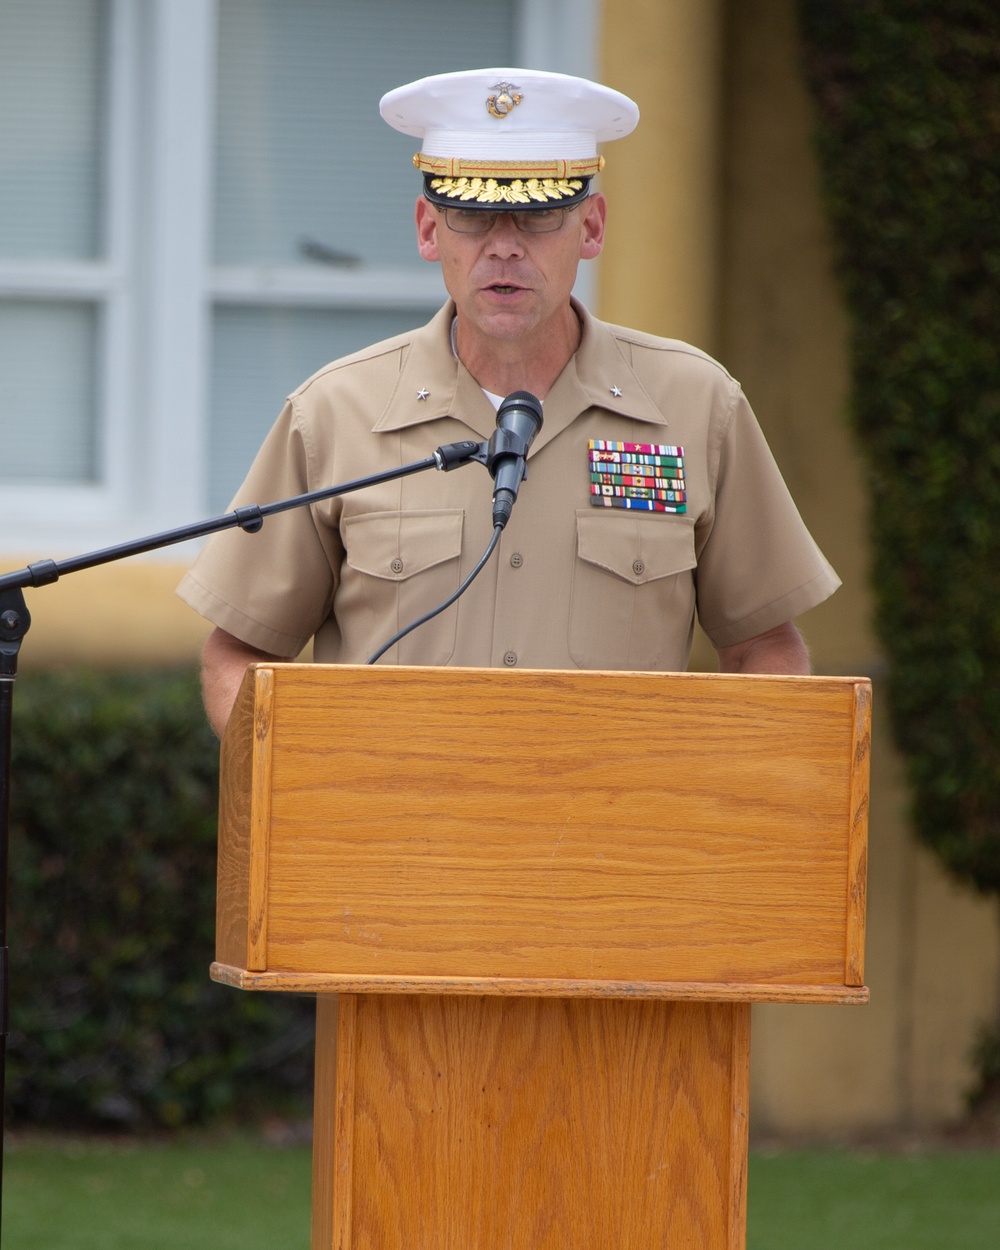 DVIDS - Images - Commanding General Change of Command [Image 1 of 4]